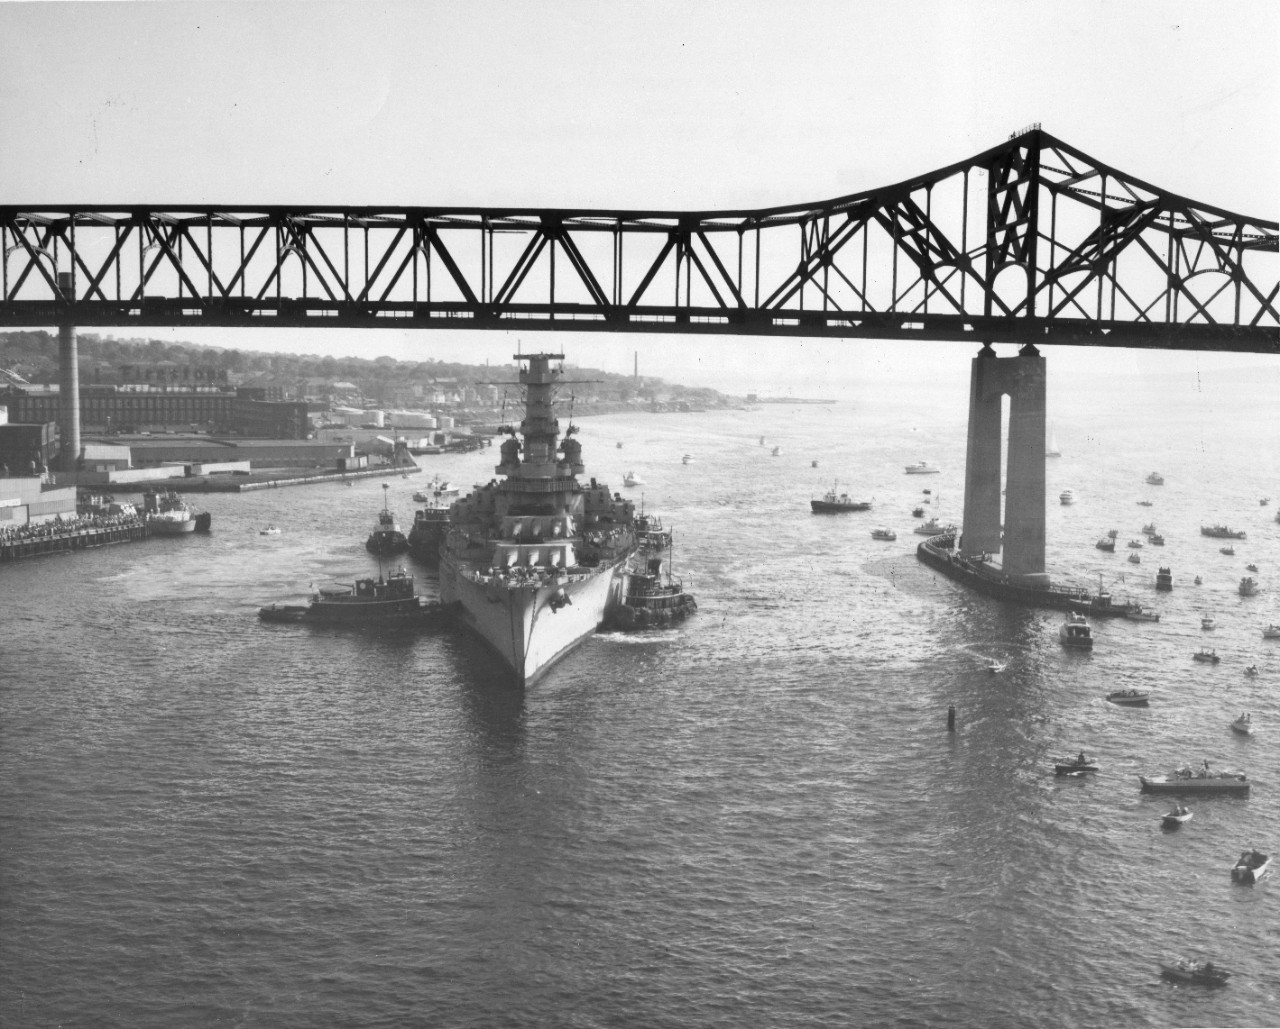 View of ex-USS Massachuetts (BB-59) as tugs maneuver it into position beneath a bridge in Fall River, Massachusetts, to its new home as a museum ship, 12 June 1965.